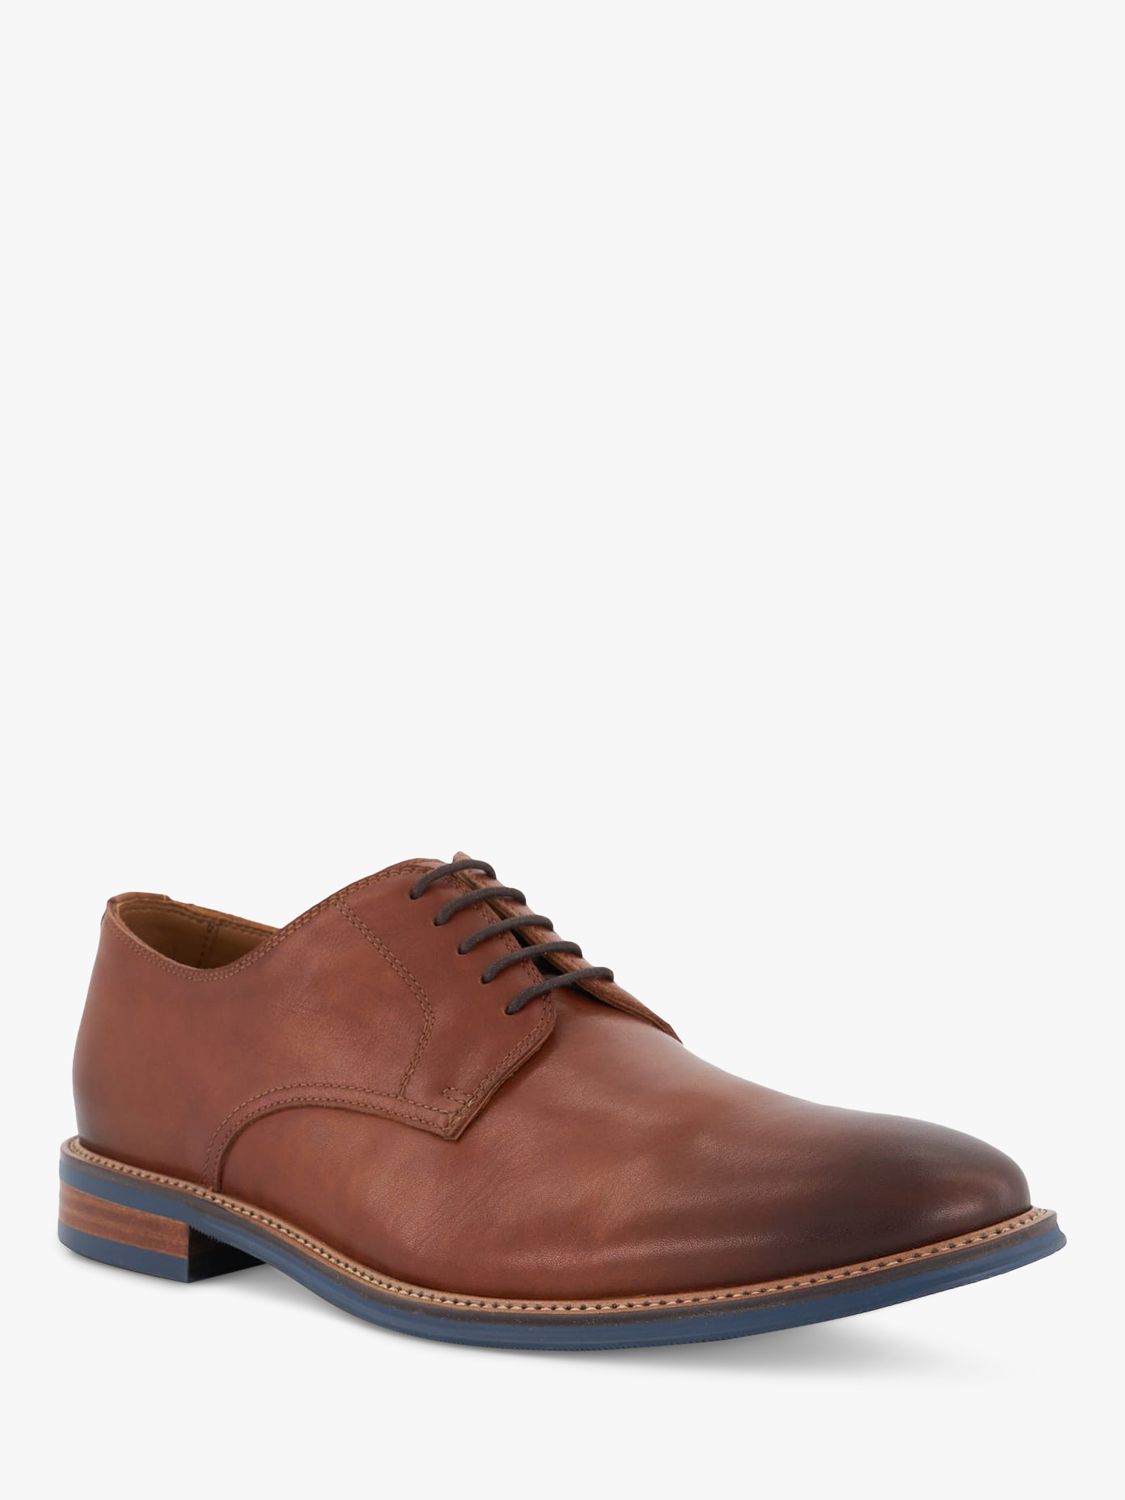 Dune Stanley Leather Derby Shoes, Tan-leather, EU40